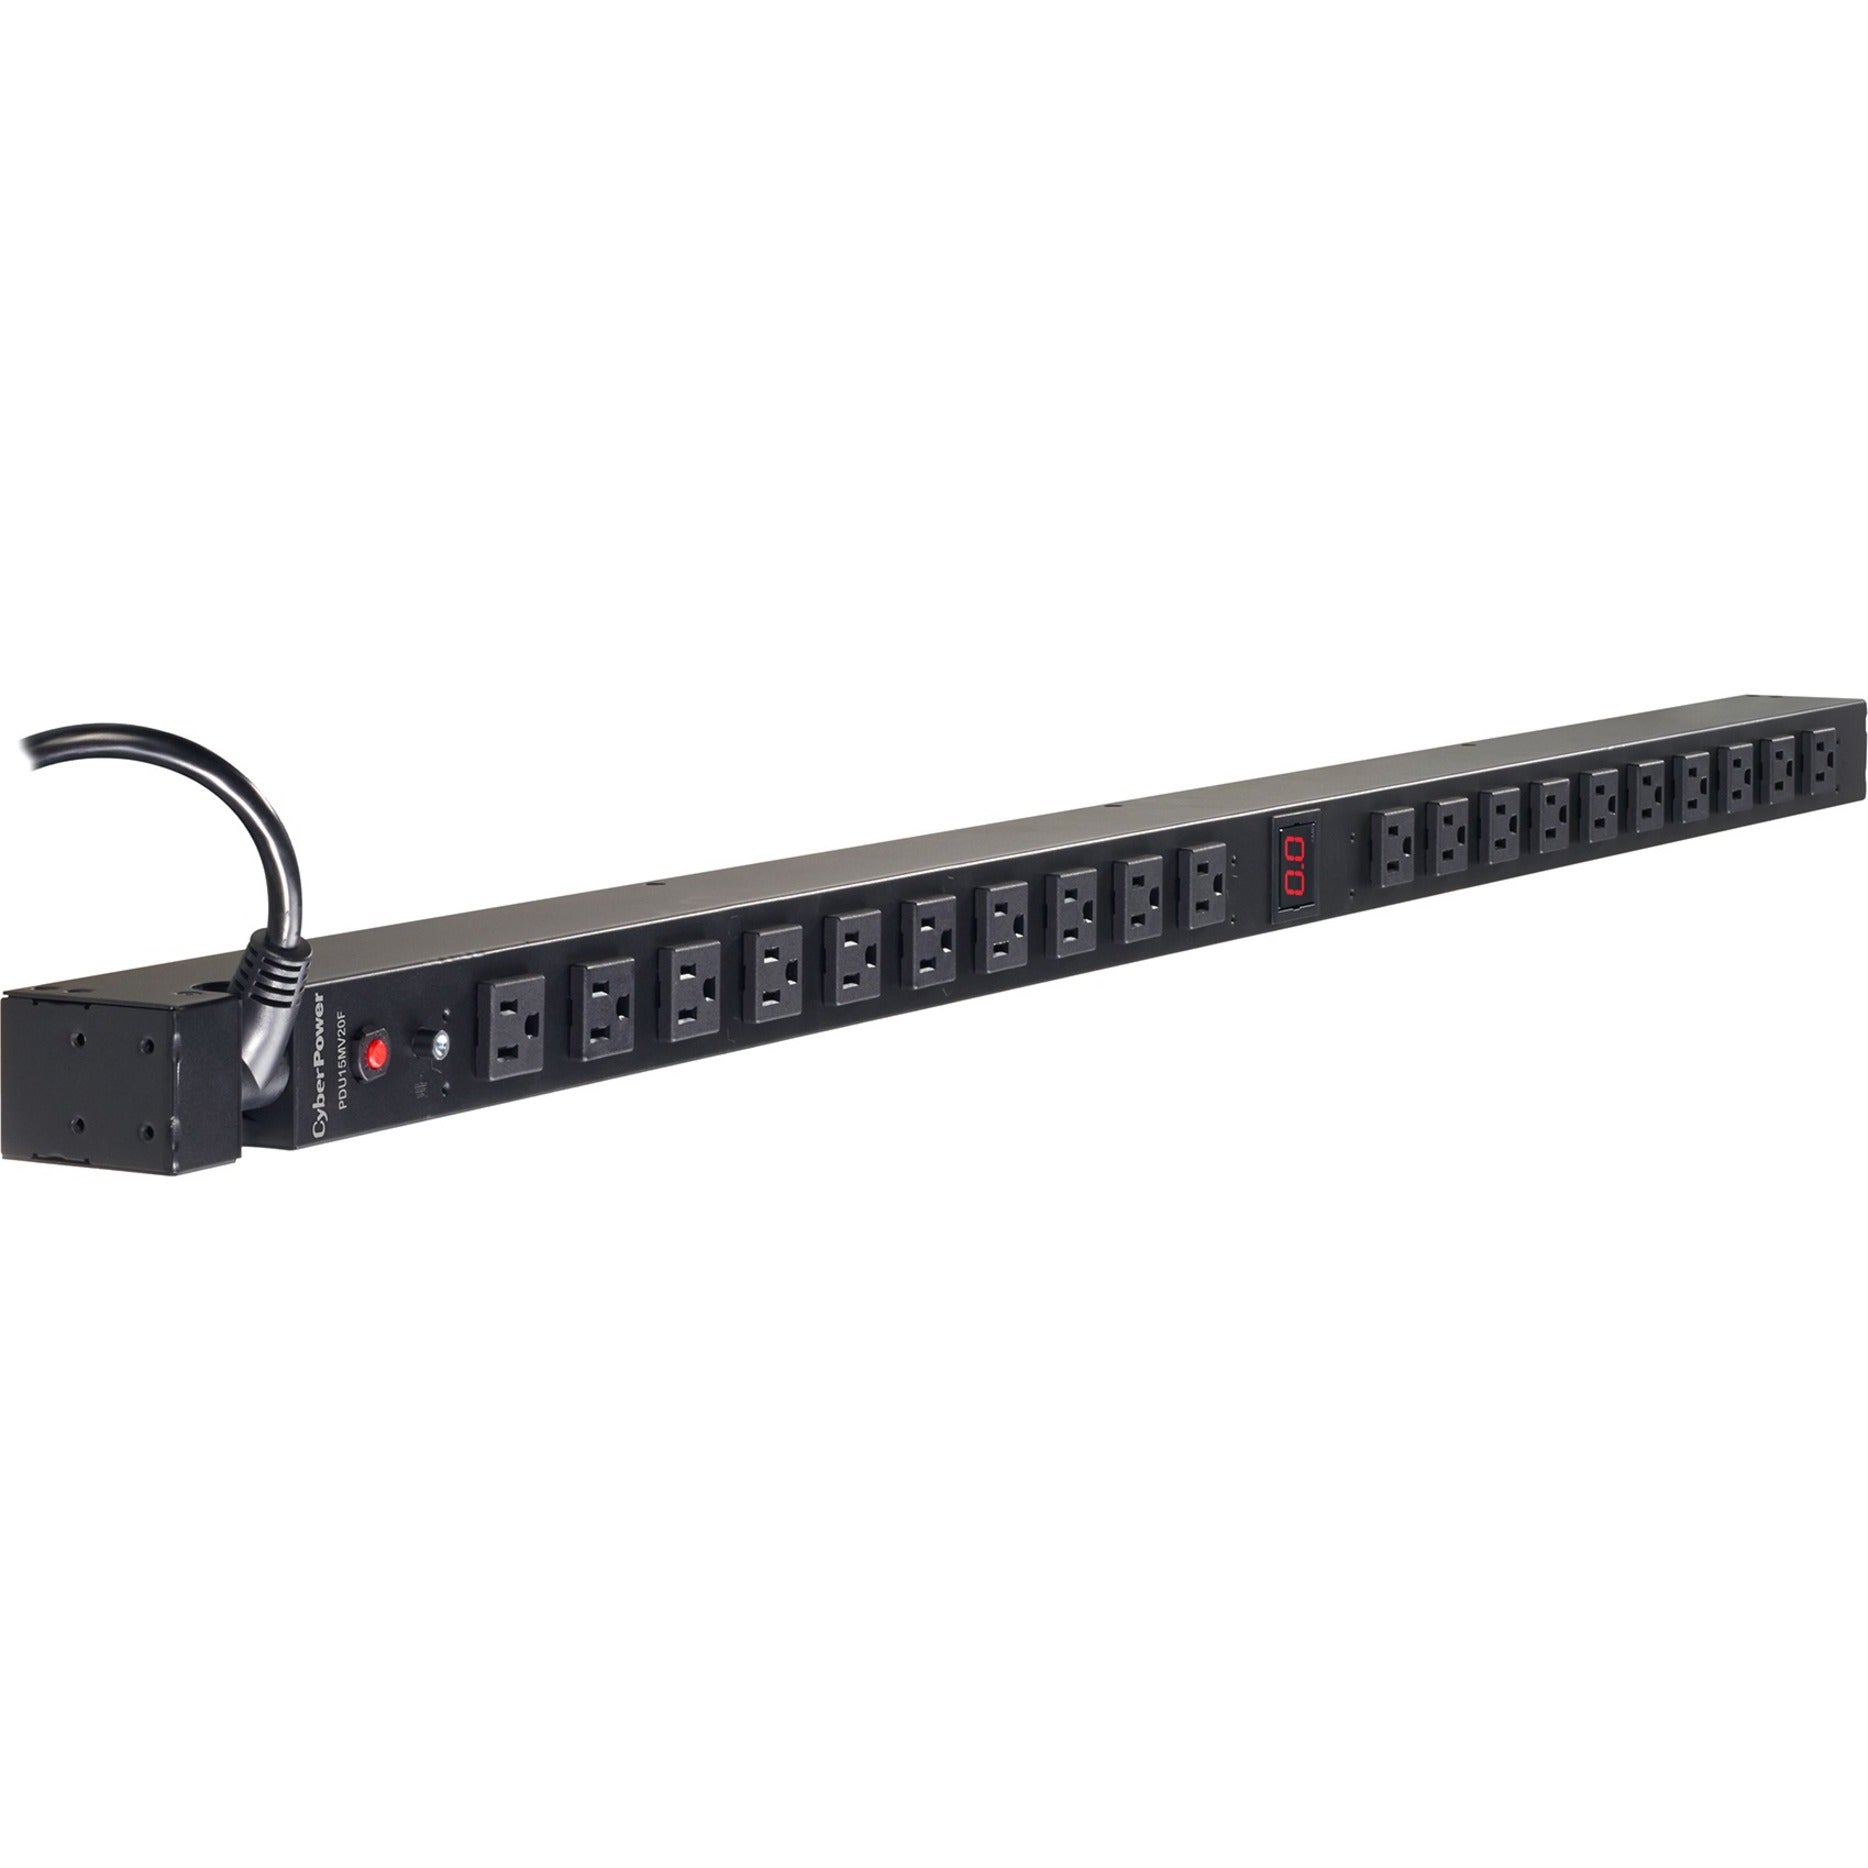 CyberPower PDU15MV20F 20-Outlets PDU, 100-125VAC 15A Metered Power Distribution Unit